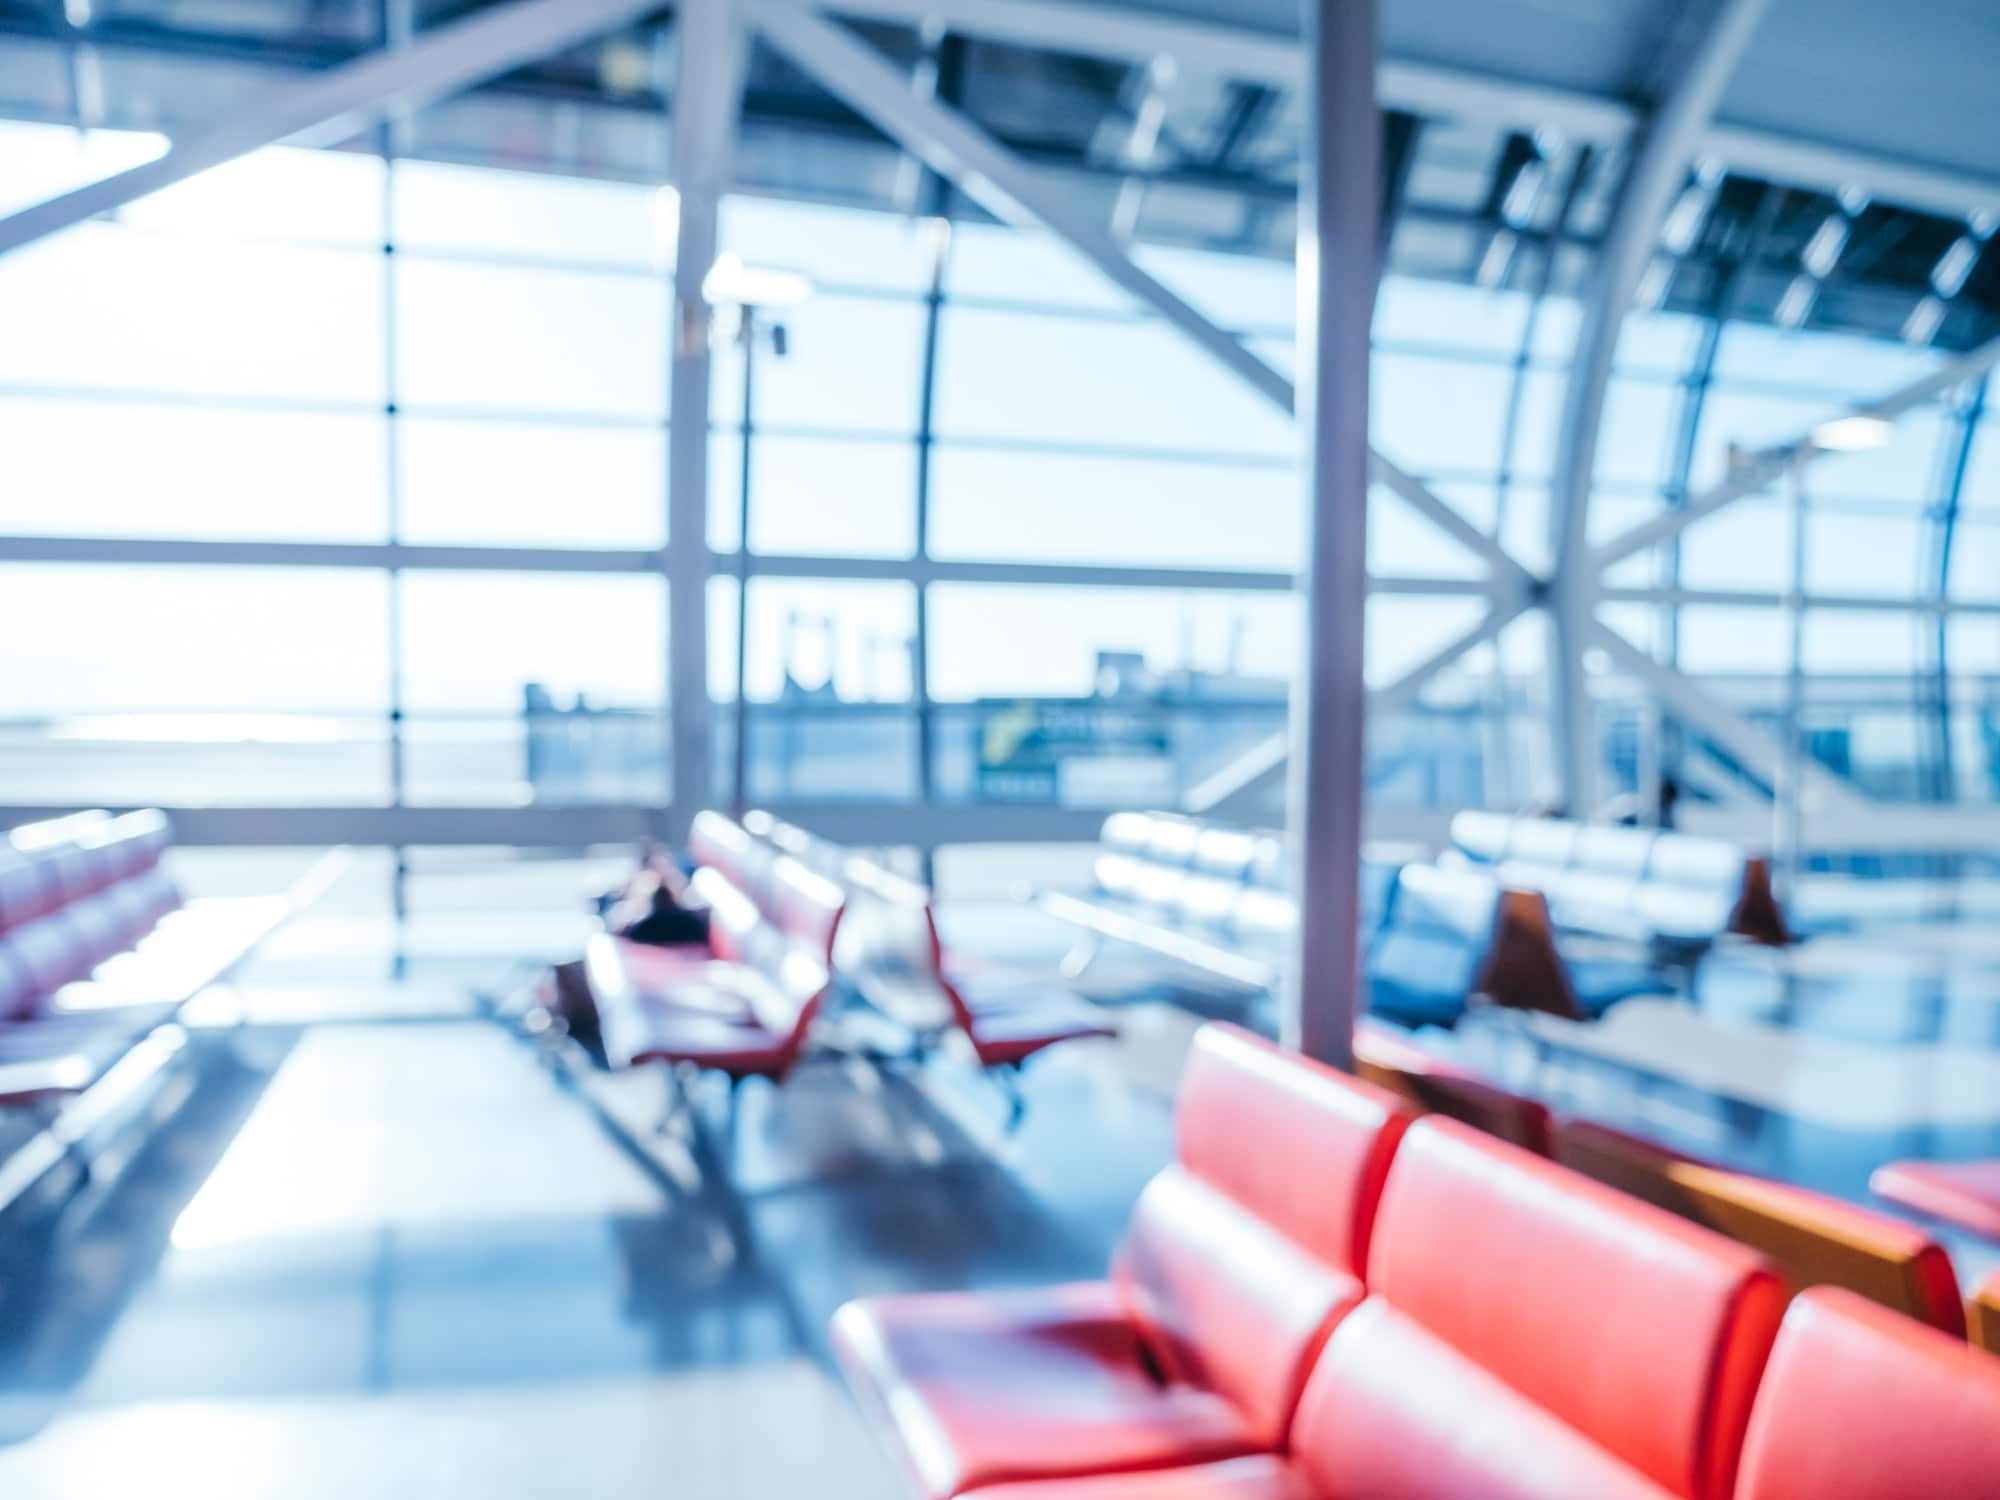 Abstract blur and defocused airport terminal interior